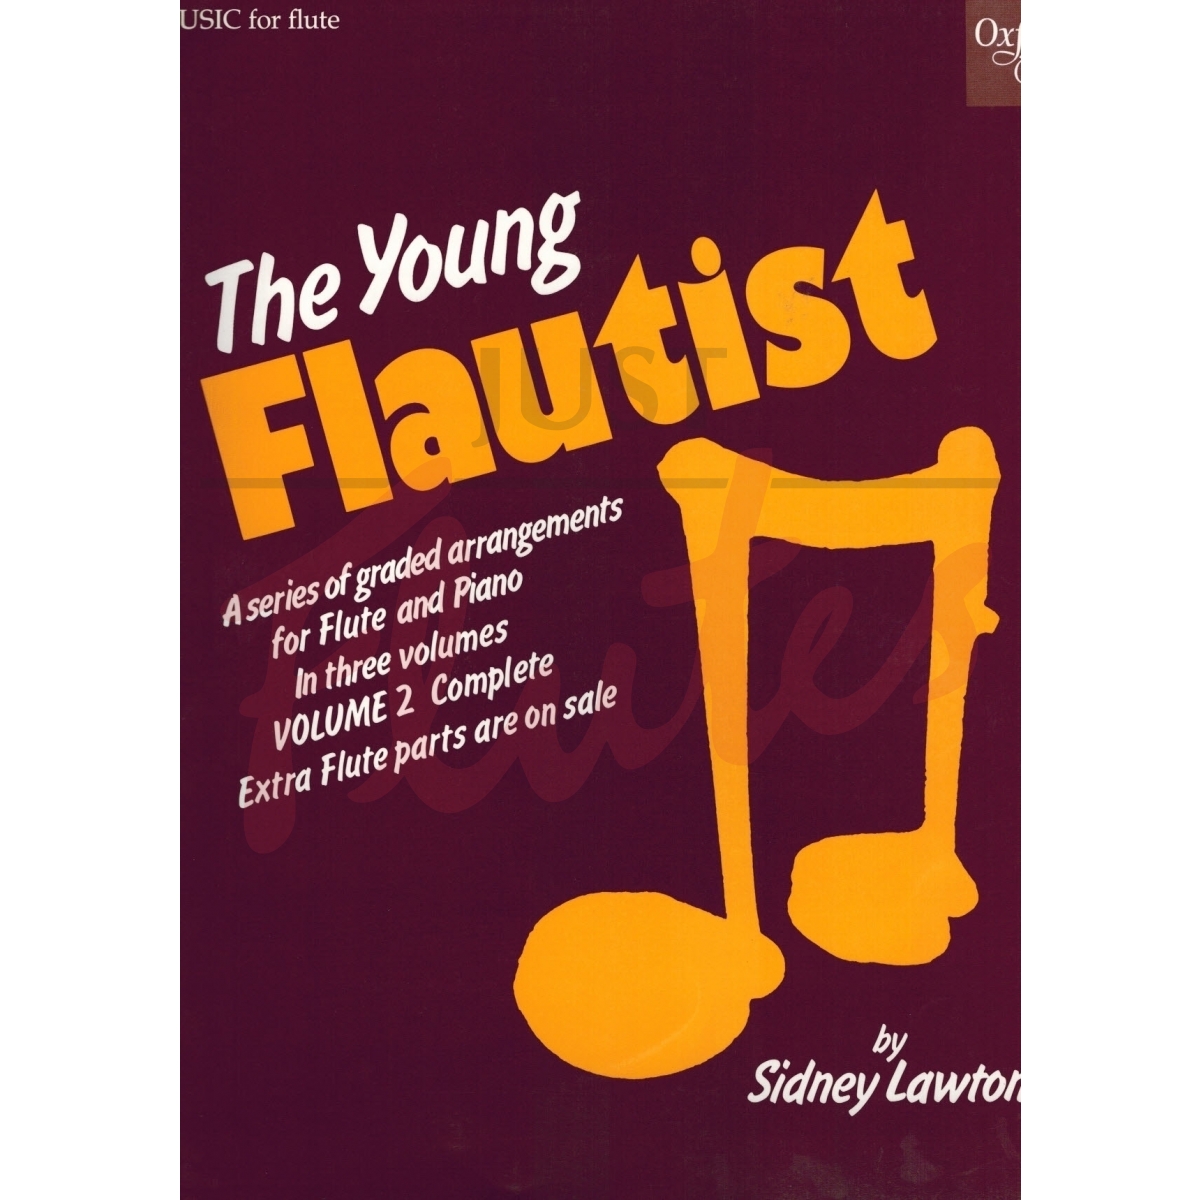 The Young Flautist Vol 2